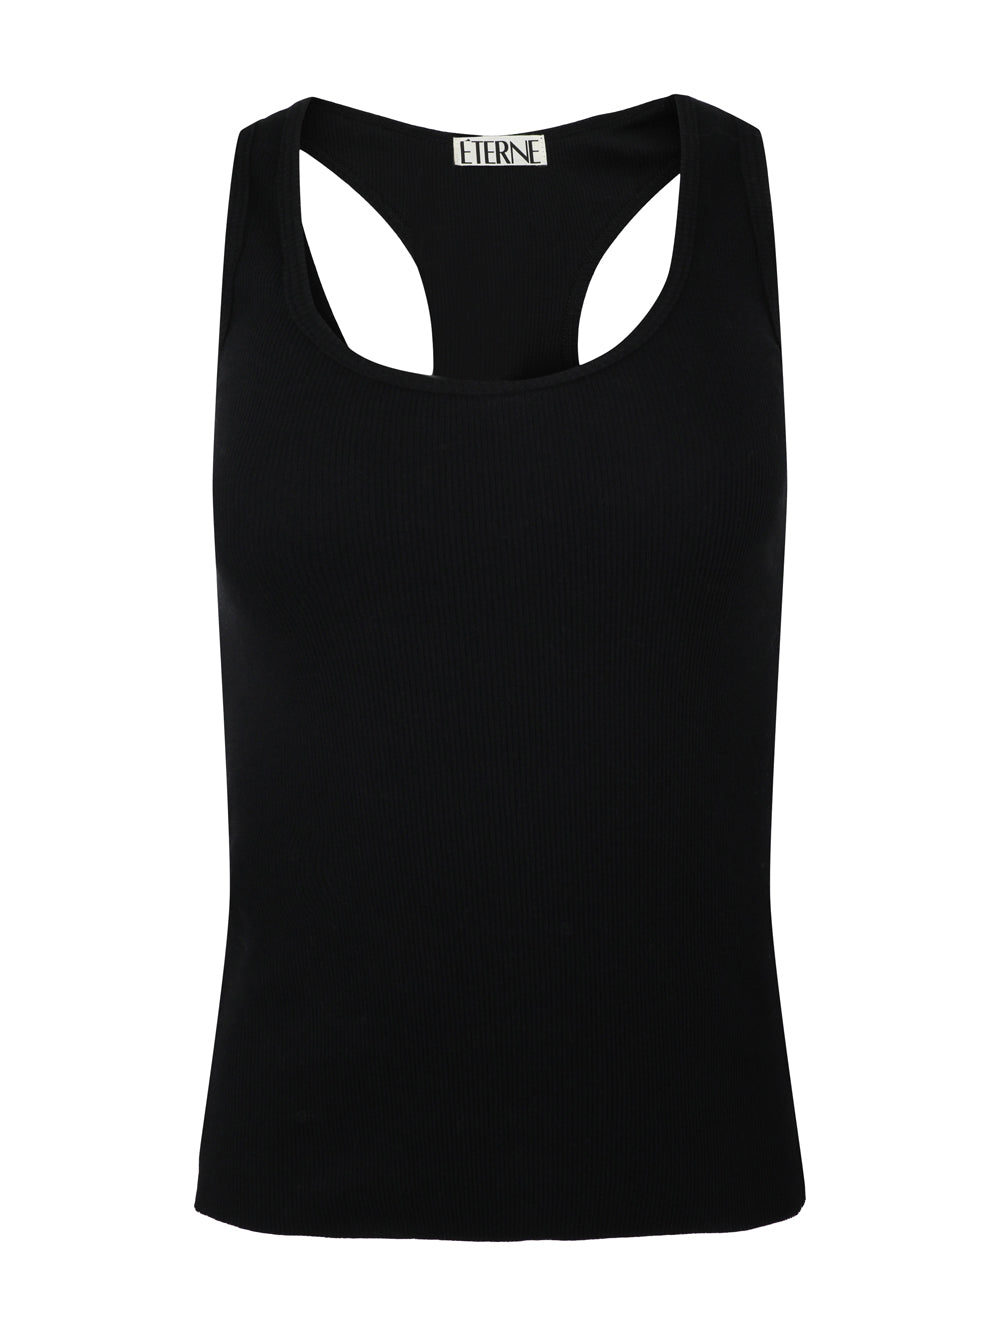 Eterne Thin Strap Fitted Tank Top in Heather Grey